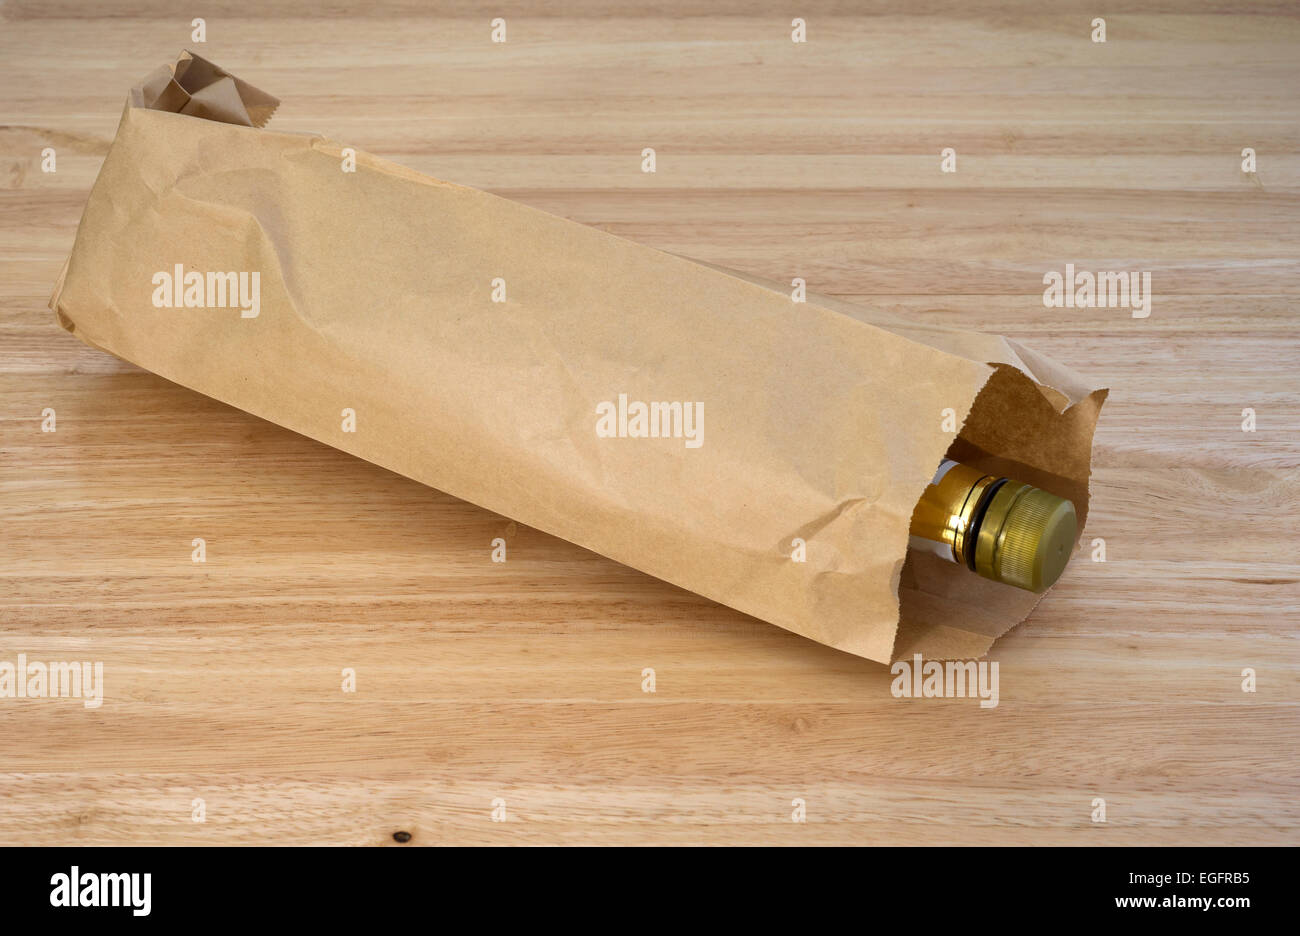 An unopened bottle of whiskey in a plain brown paper bag laying on a wood table top. Stock Photo